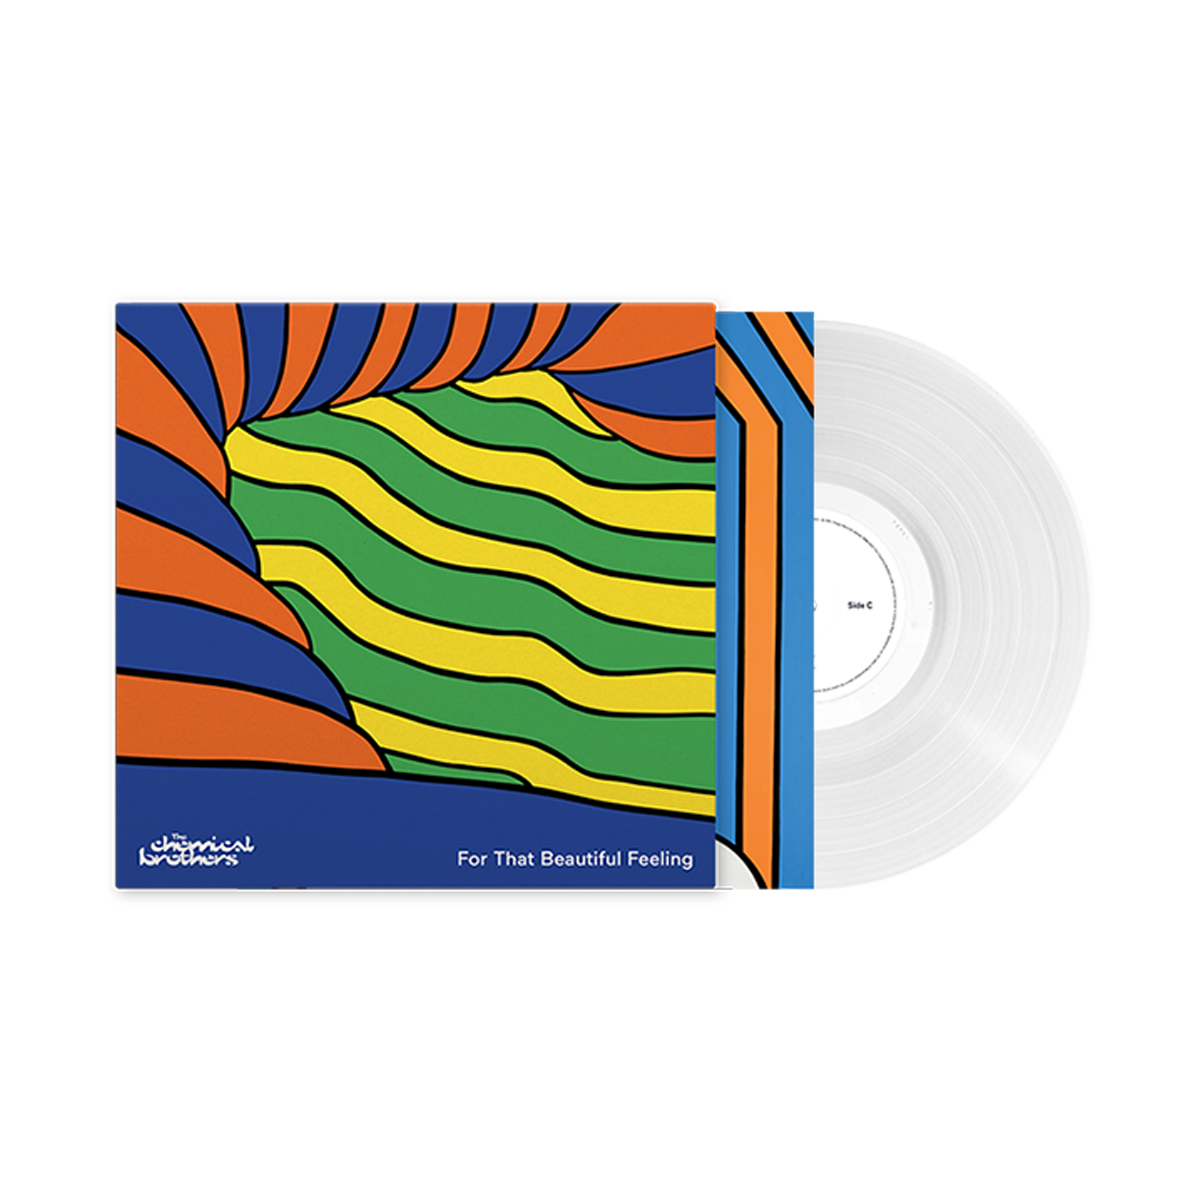 For That Beautiful Feeling: Limited White Vinyl 2LP, CD + Hand Numbered Art Print